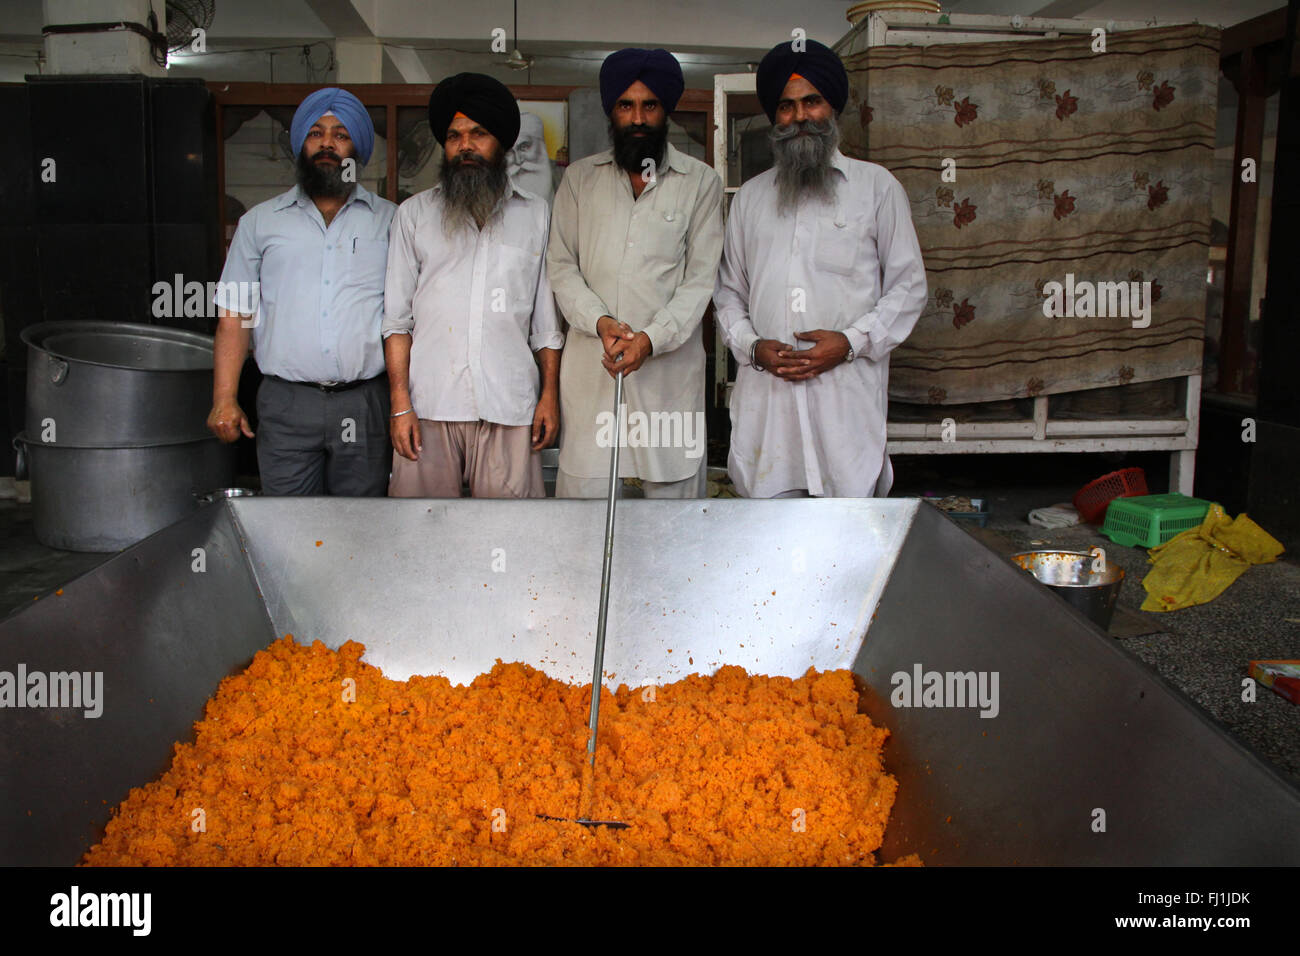 Volunteers working in the kitchen of the Golden temple, Amritsar , India Stock Photo